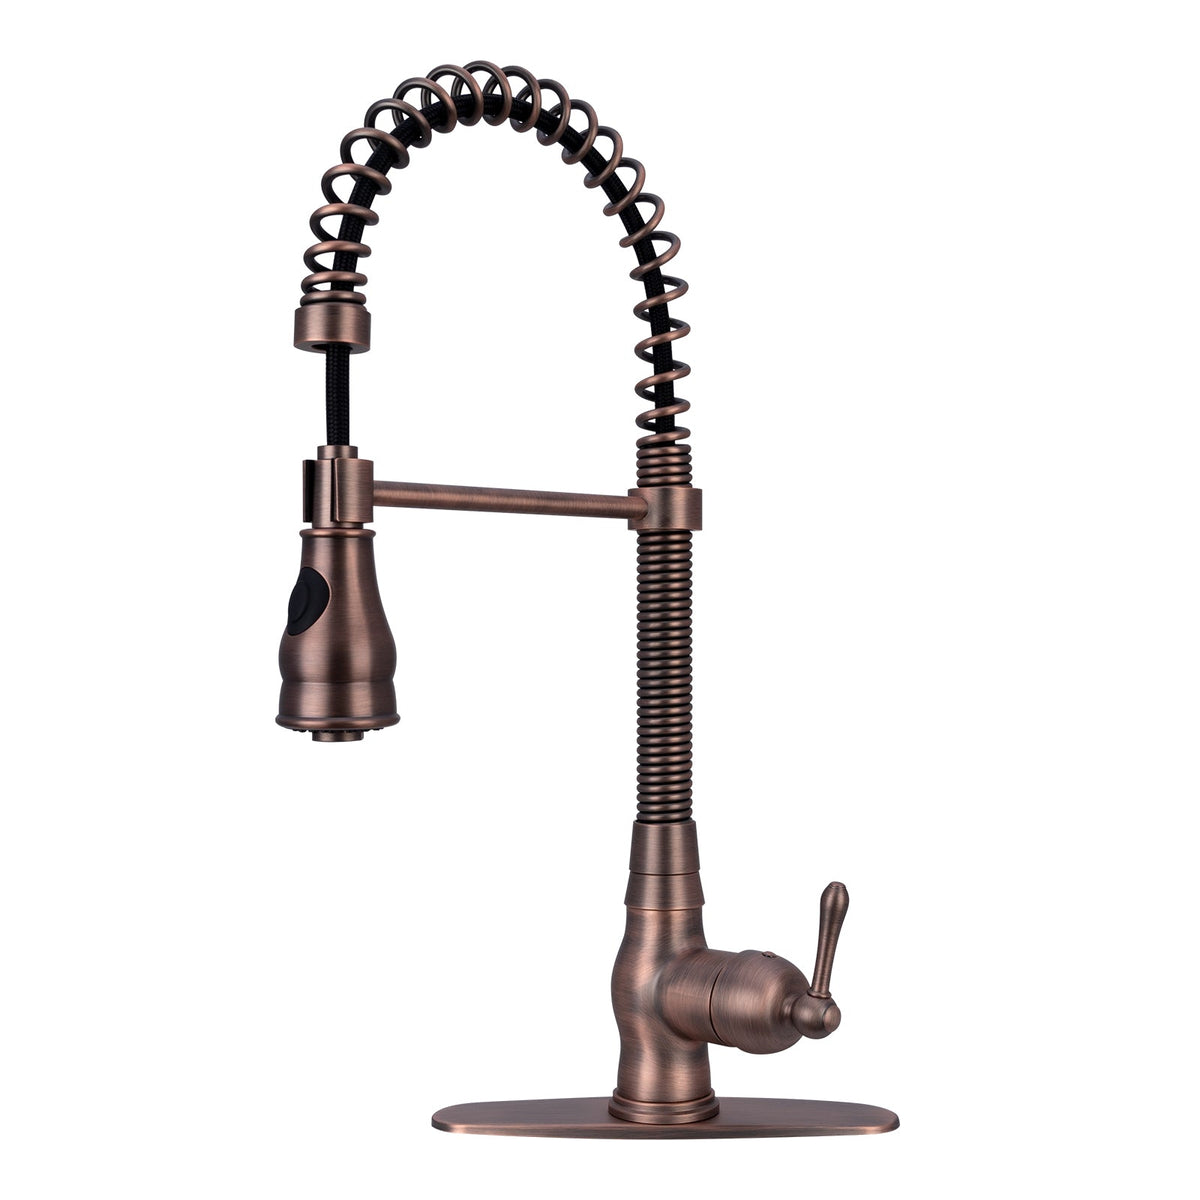 Antique Bronze Pre-Rinse Spring Kitchen Faucet, Single Level Solid Brass Kitchen Sink Faucets with Pull Down Sprayer - AK96518A-AB